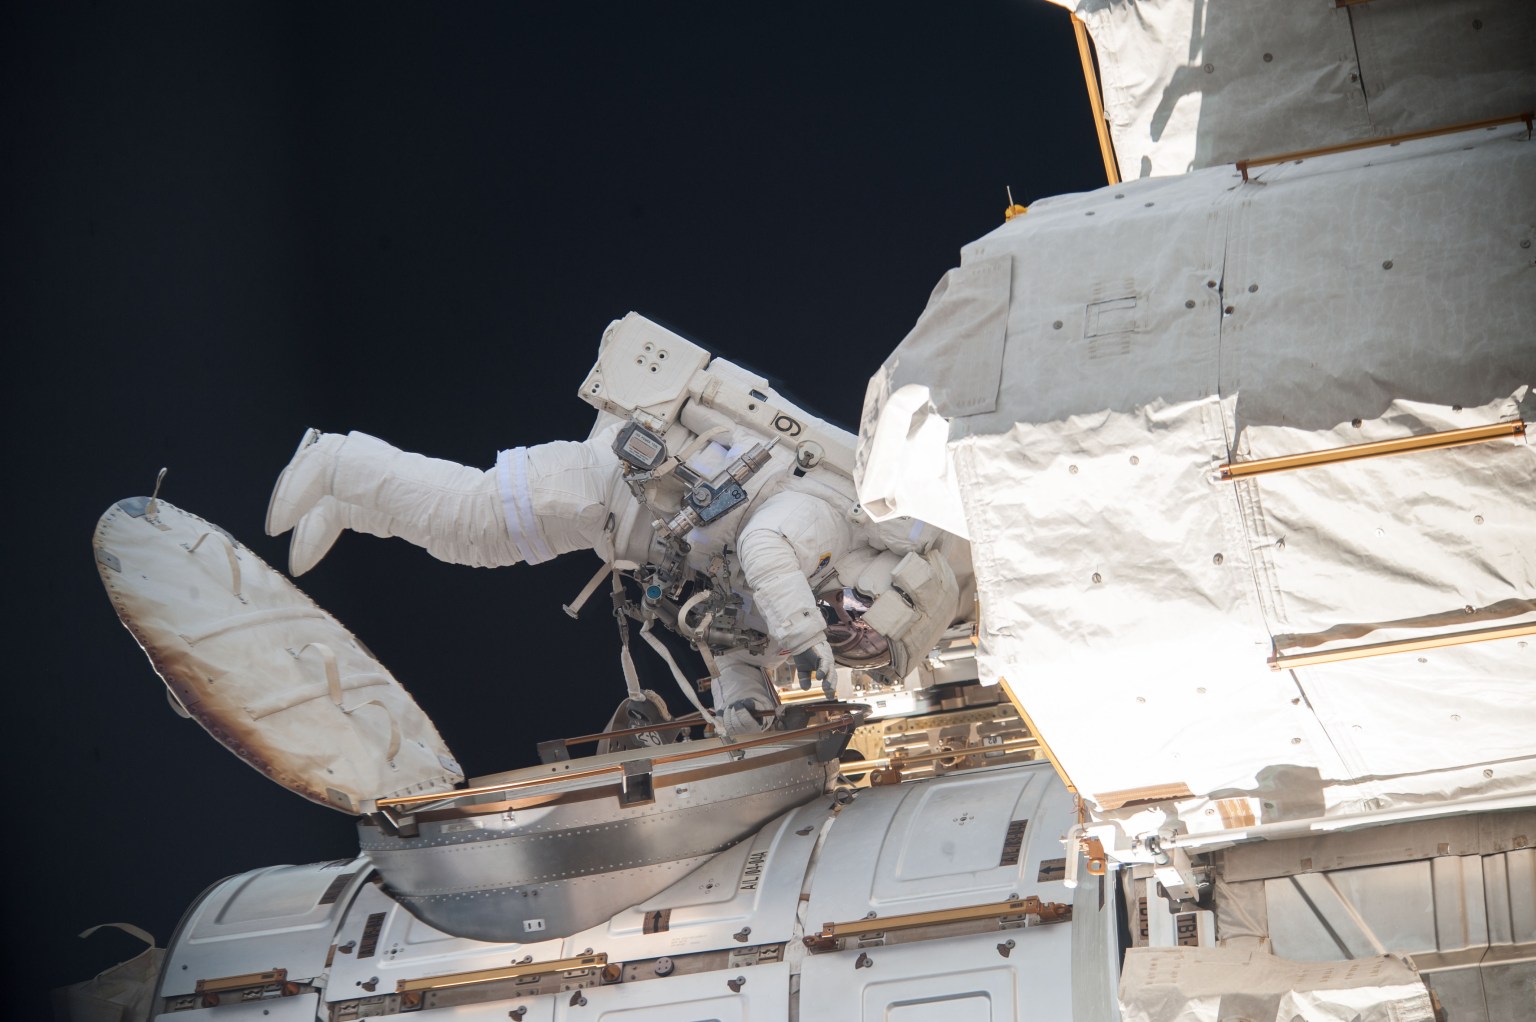 Seen near the hatch to the Quest airlock, NASA astronaut Mike Hopkins participates in the first Expedition 38 spacewalk designed to troubleshoot a faulty coolant pump on the International Space Station. He was joined by NASA astronaut Rick Mastracchio while four crewmates representing Roscosmos and the Japan Aerospace Exploration Agency remained inside the orbital outpost.